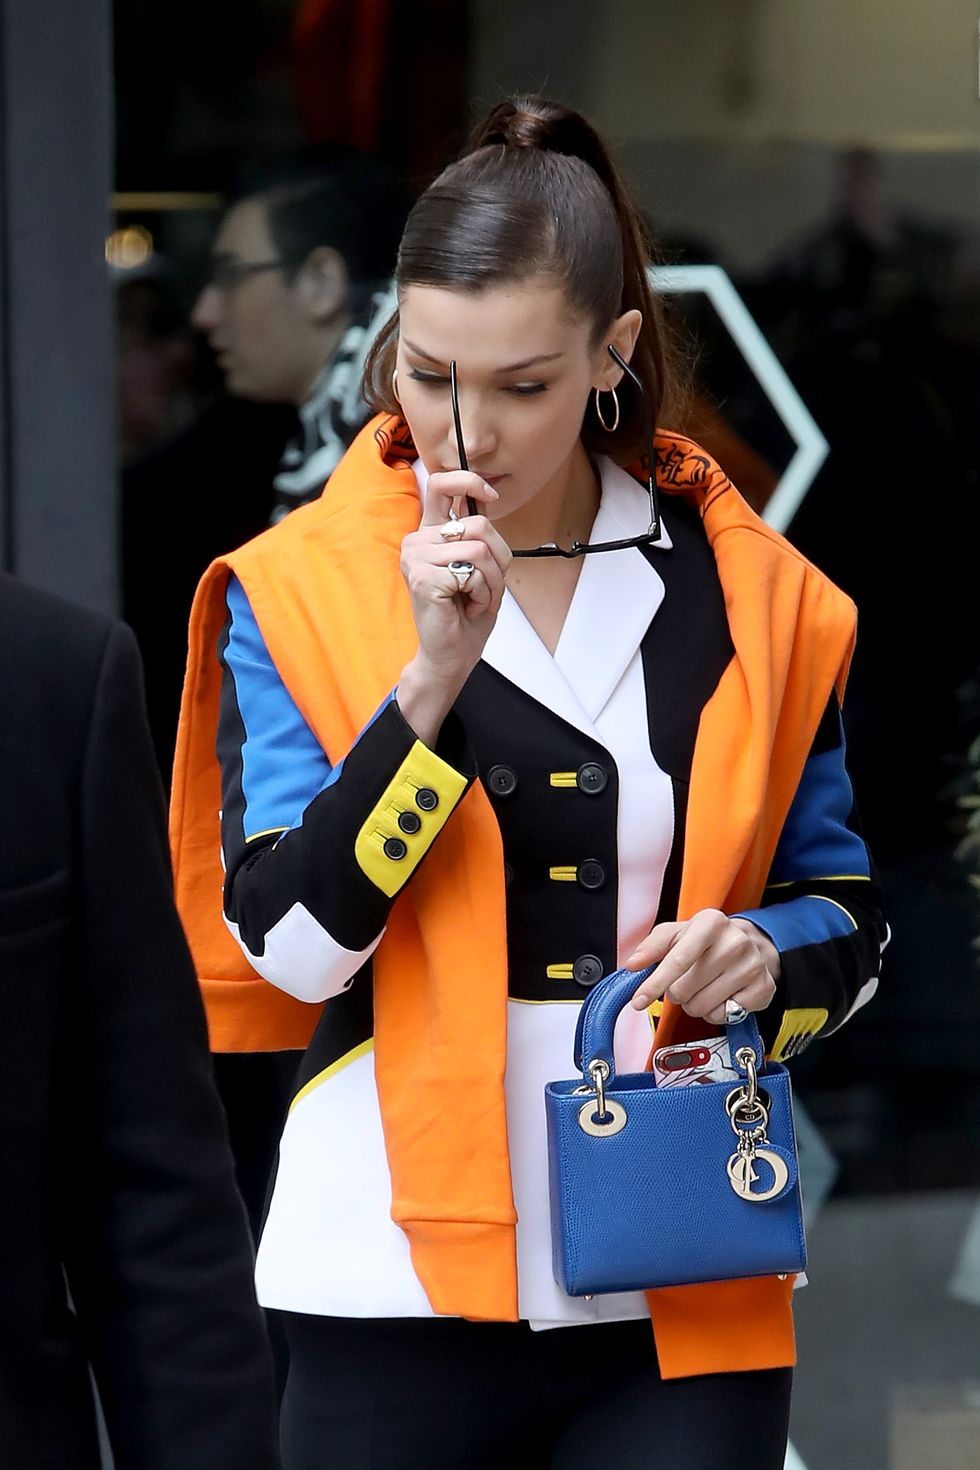 Bella Hadid Style - Shops at Louis Vuitton in NYC 01/09/2019